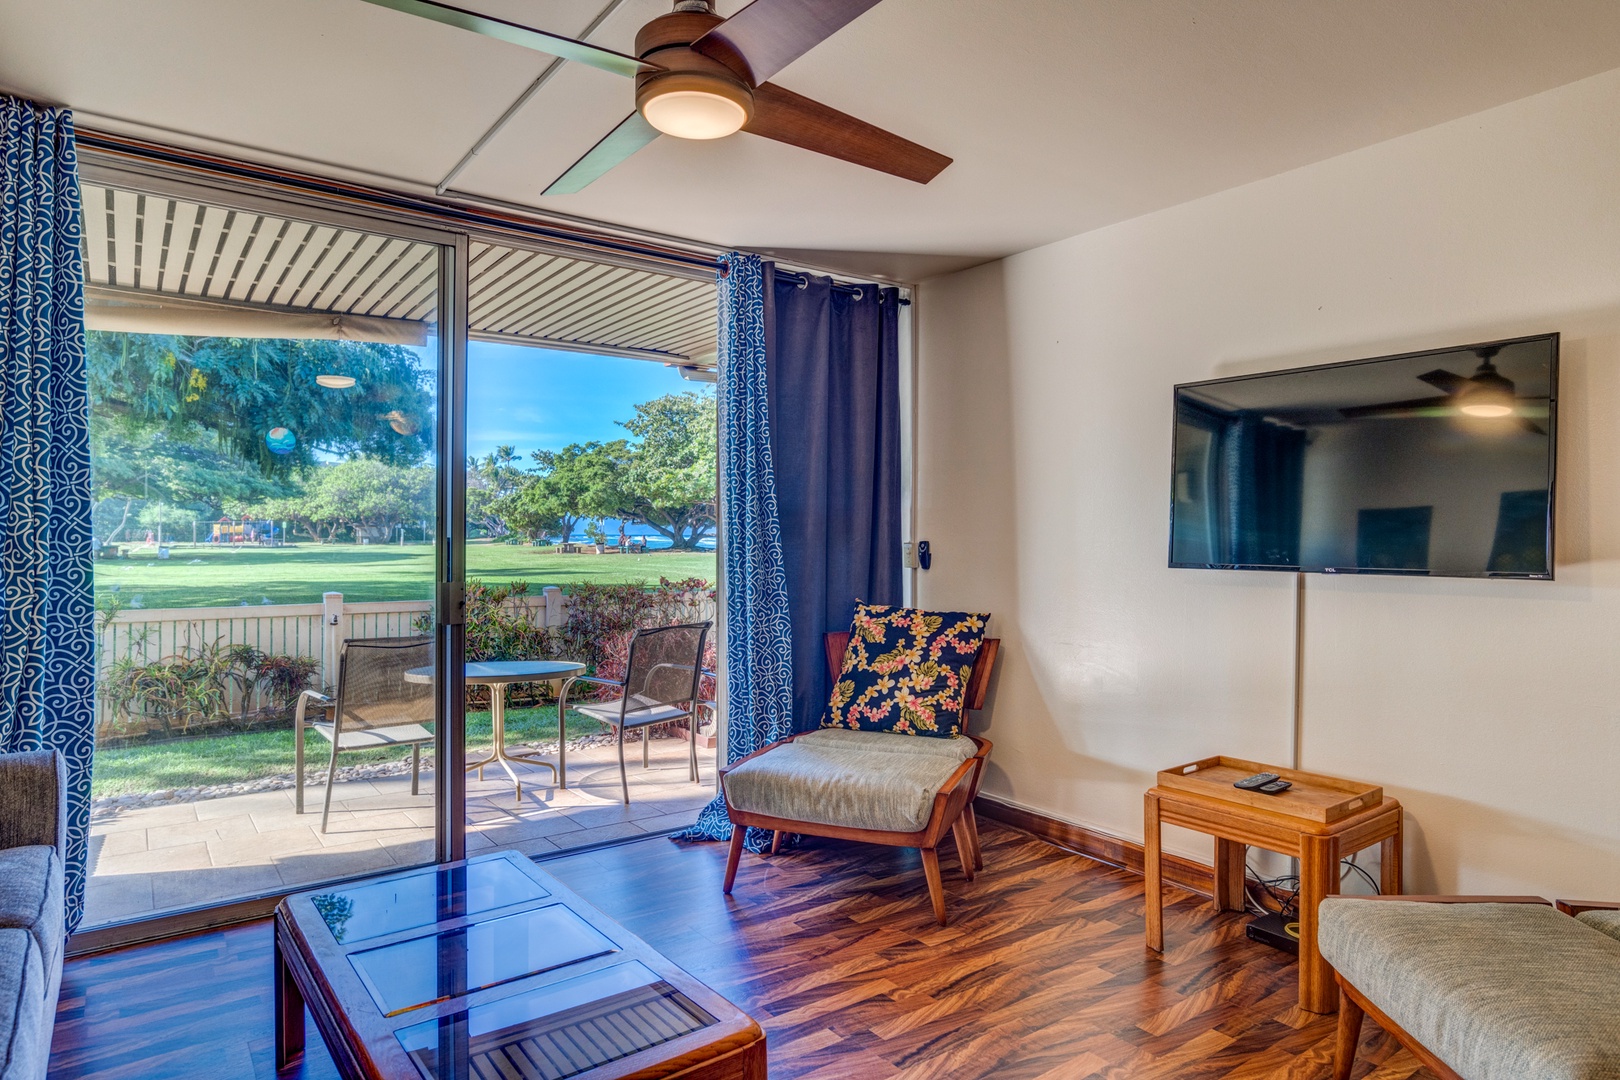 Lahaina Vacation Rentals, Hale Kai 109 - Ocean views from the living room